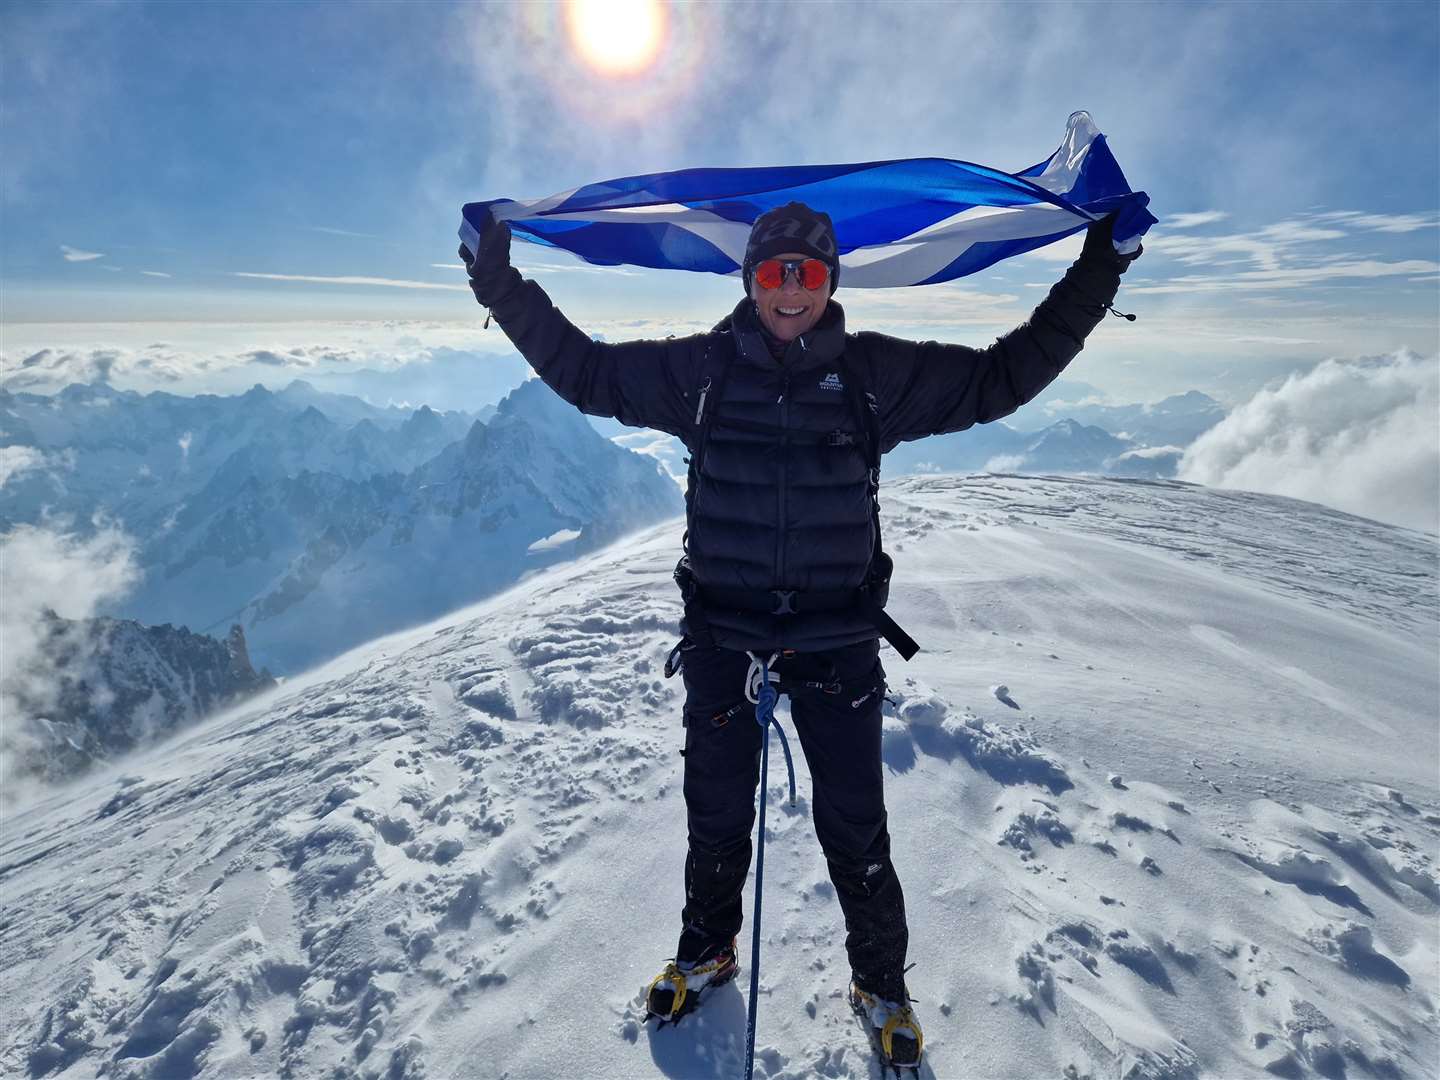 Lee Donald is set to head to Everest in March.